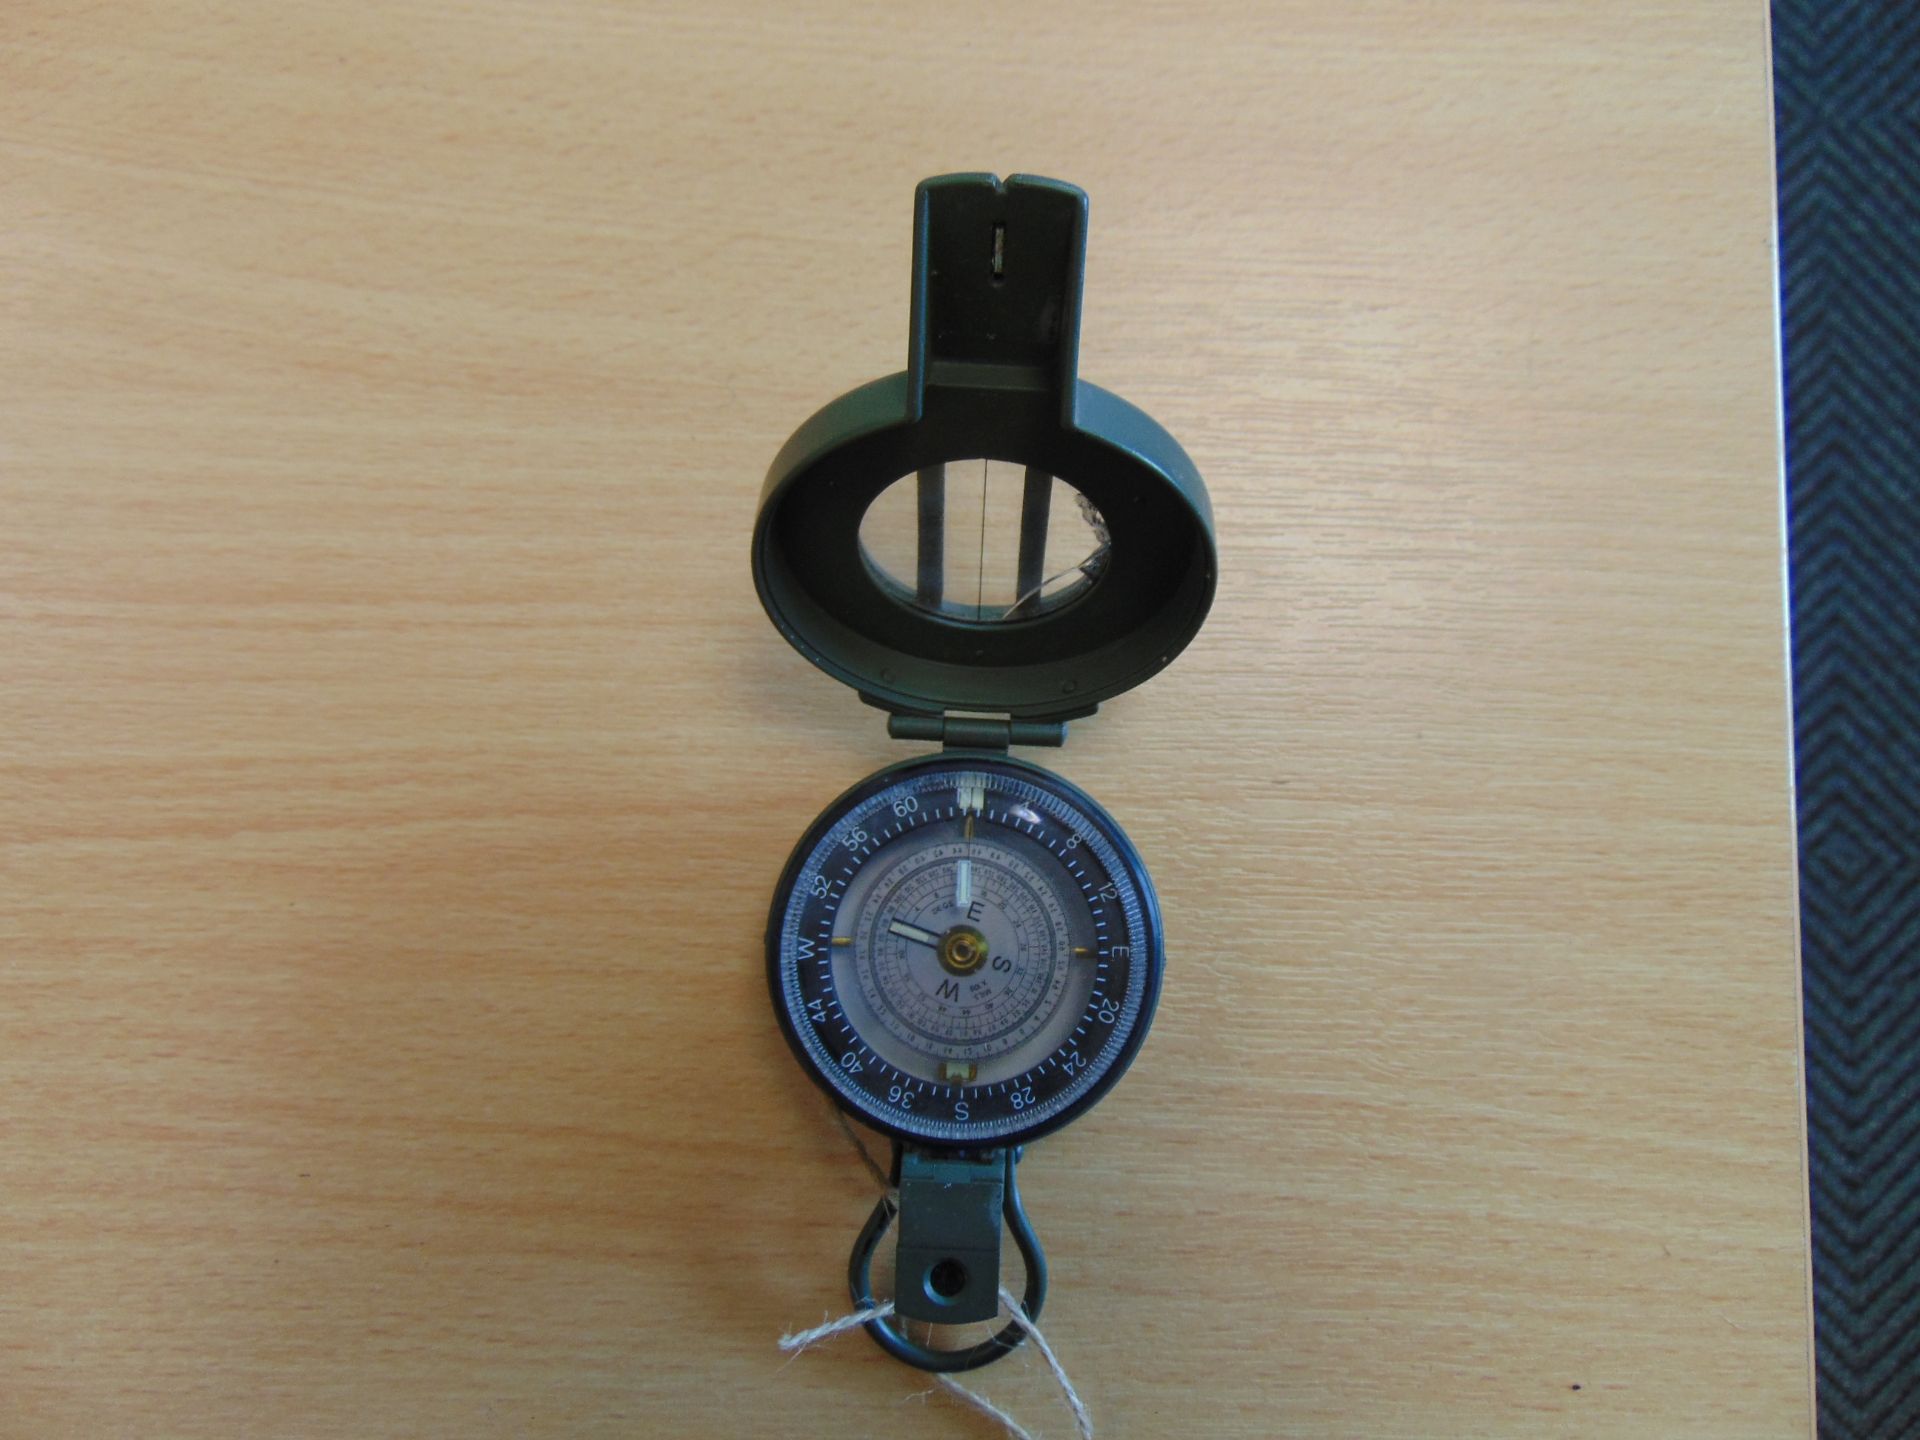 Francis Barker British Army M88 Prismatic Compass in Mils - Image 2 of 4